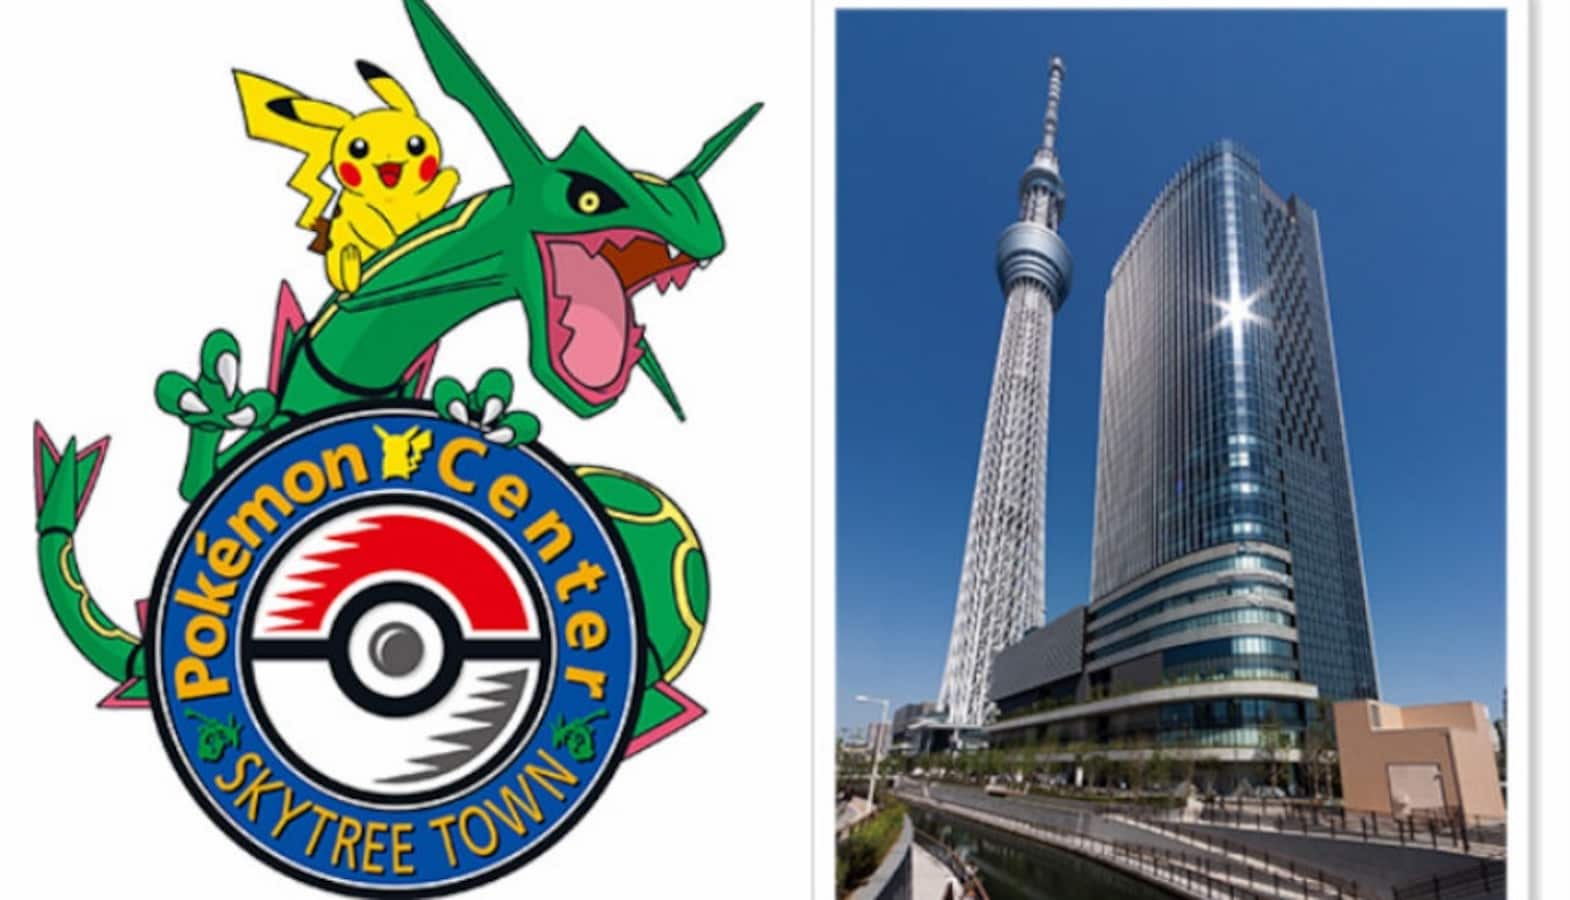 Pokemon Center Set To Open At Tokyo Skytree All About Japan